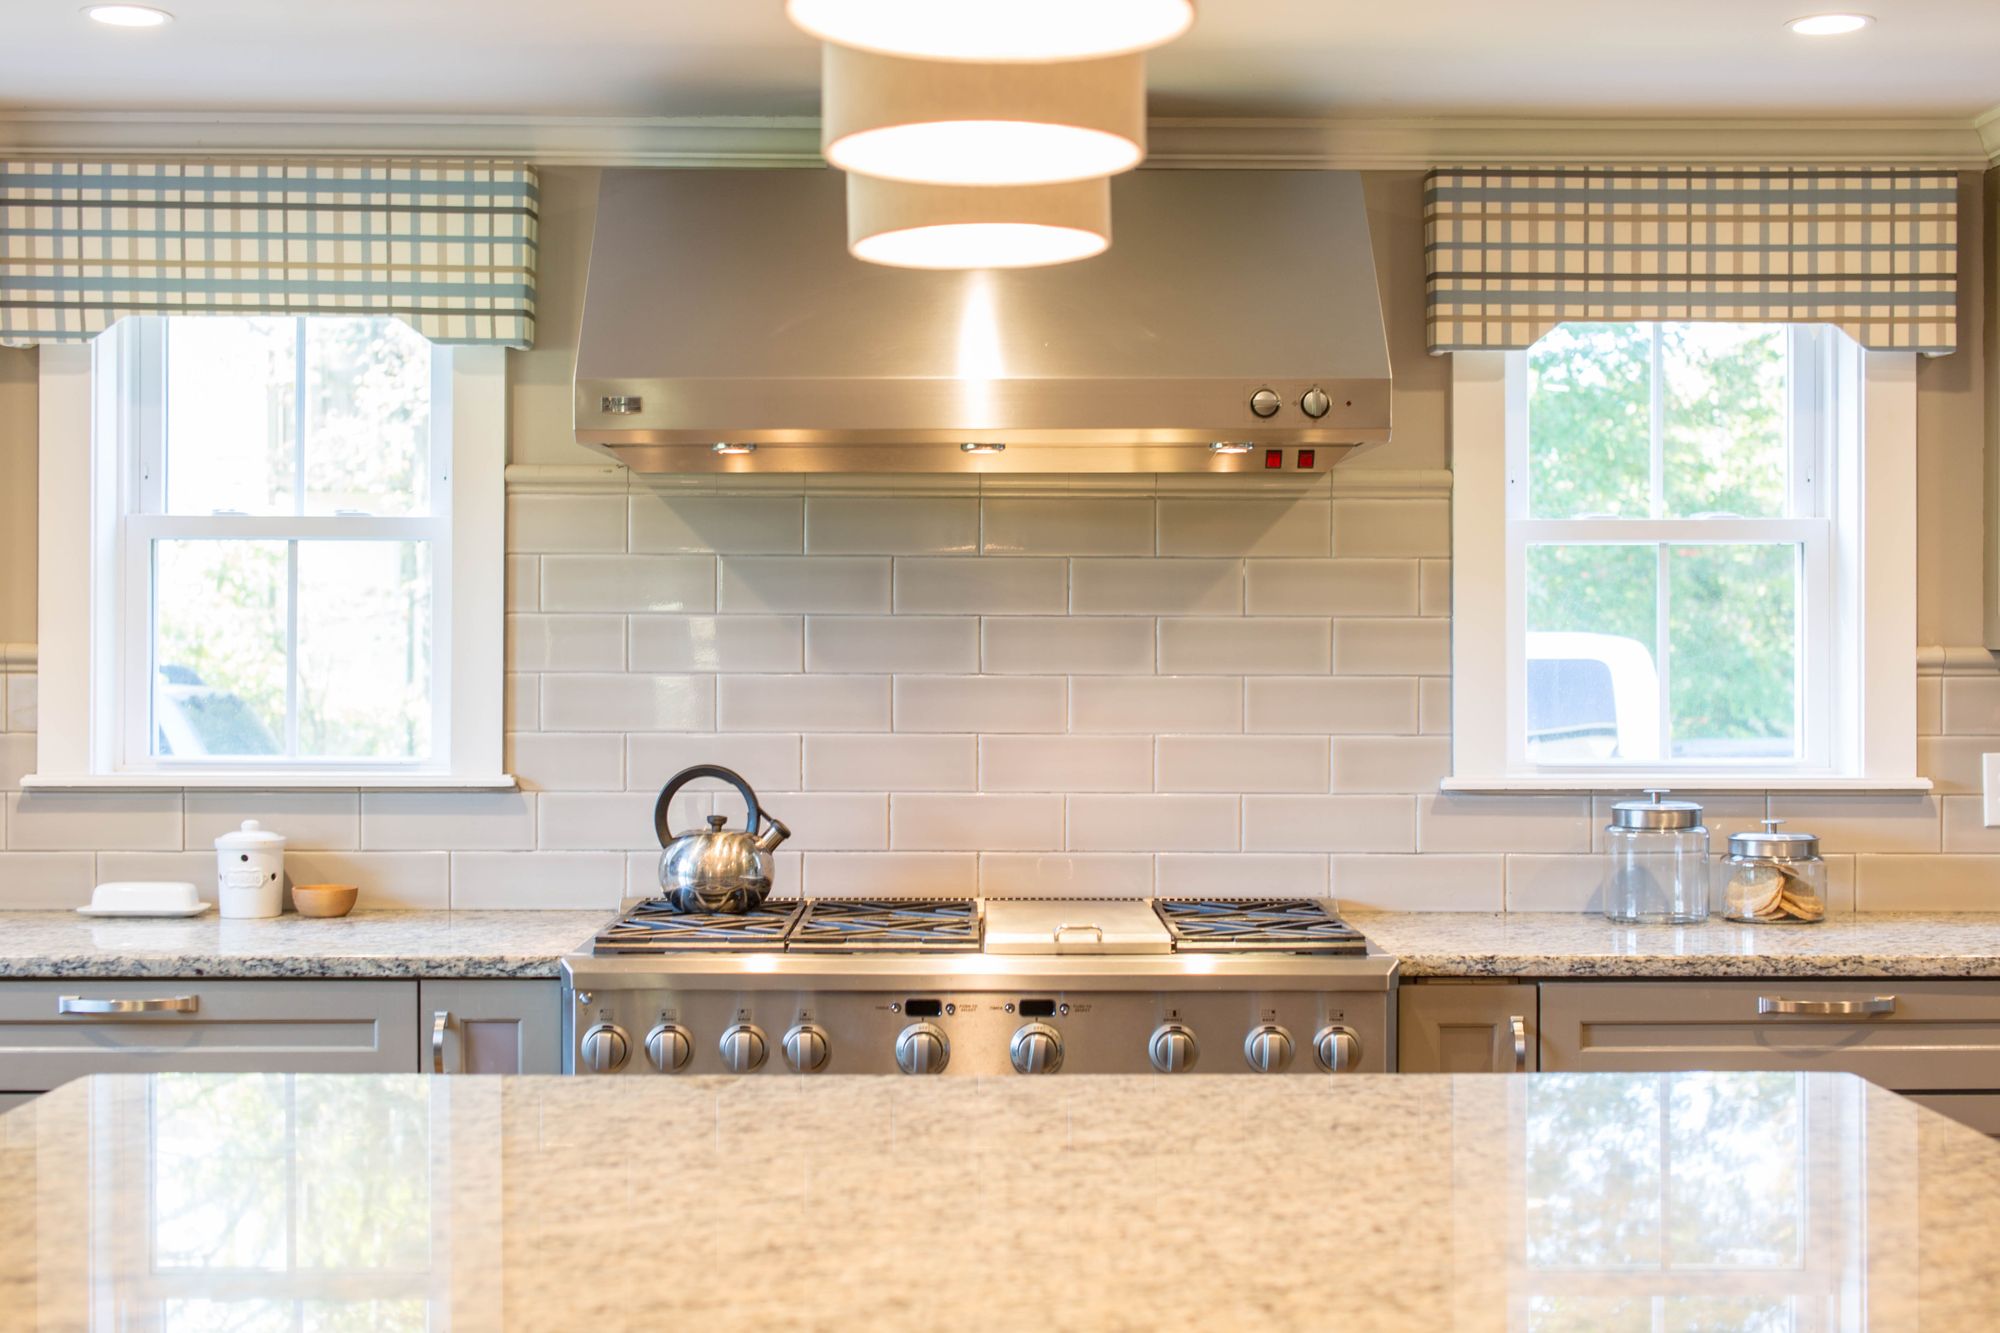 Choosing a Range Hood for Your Kitchen in 2020